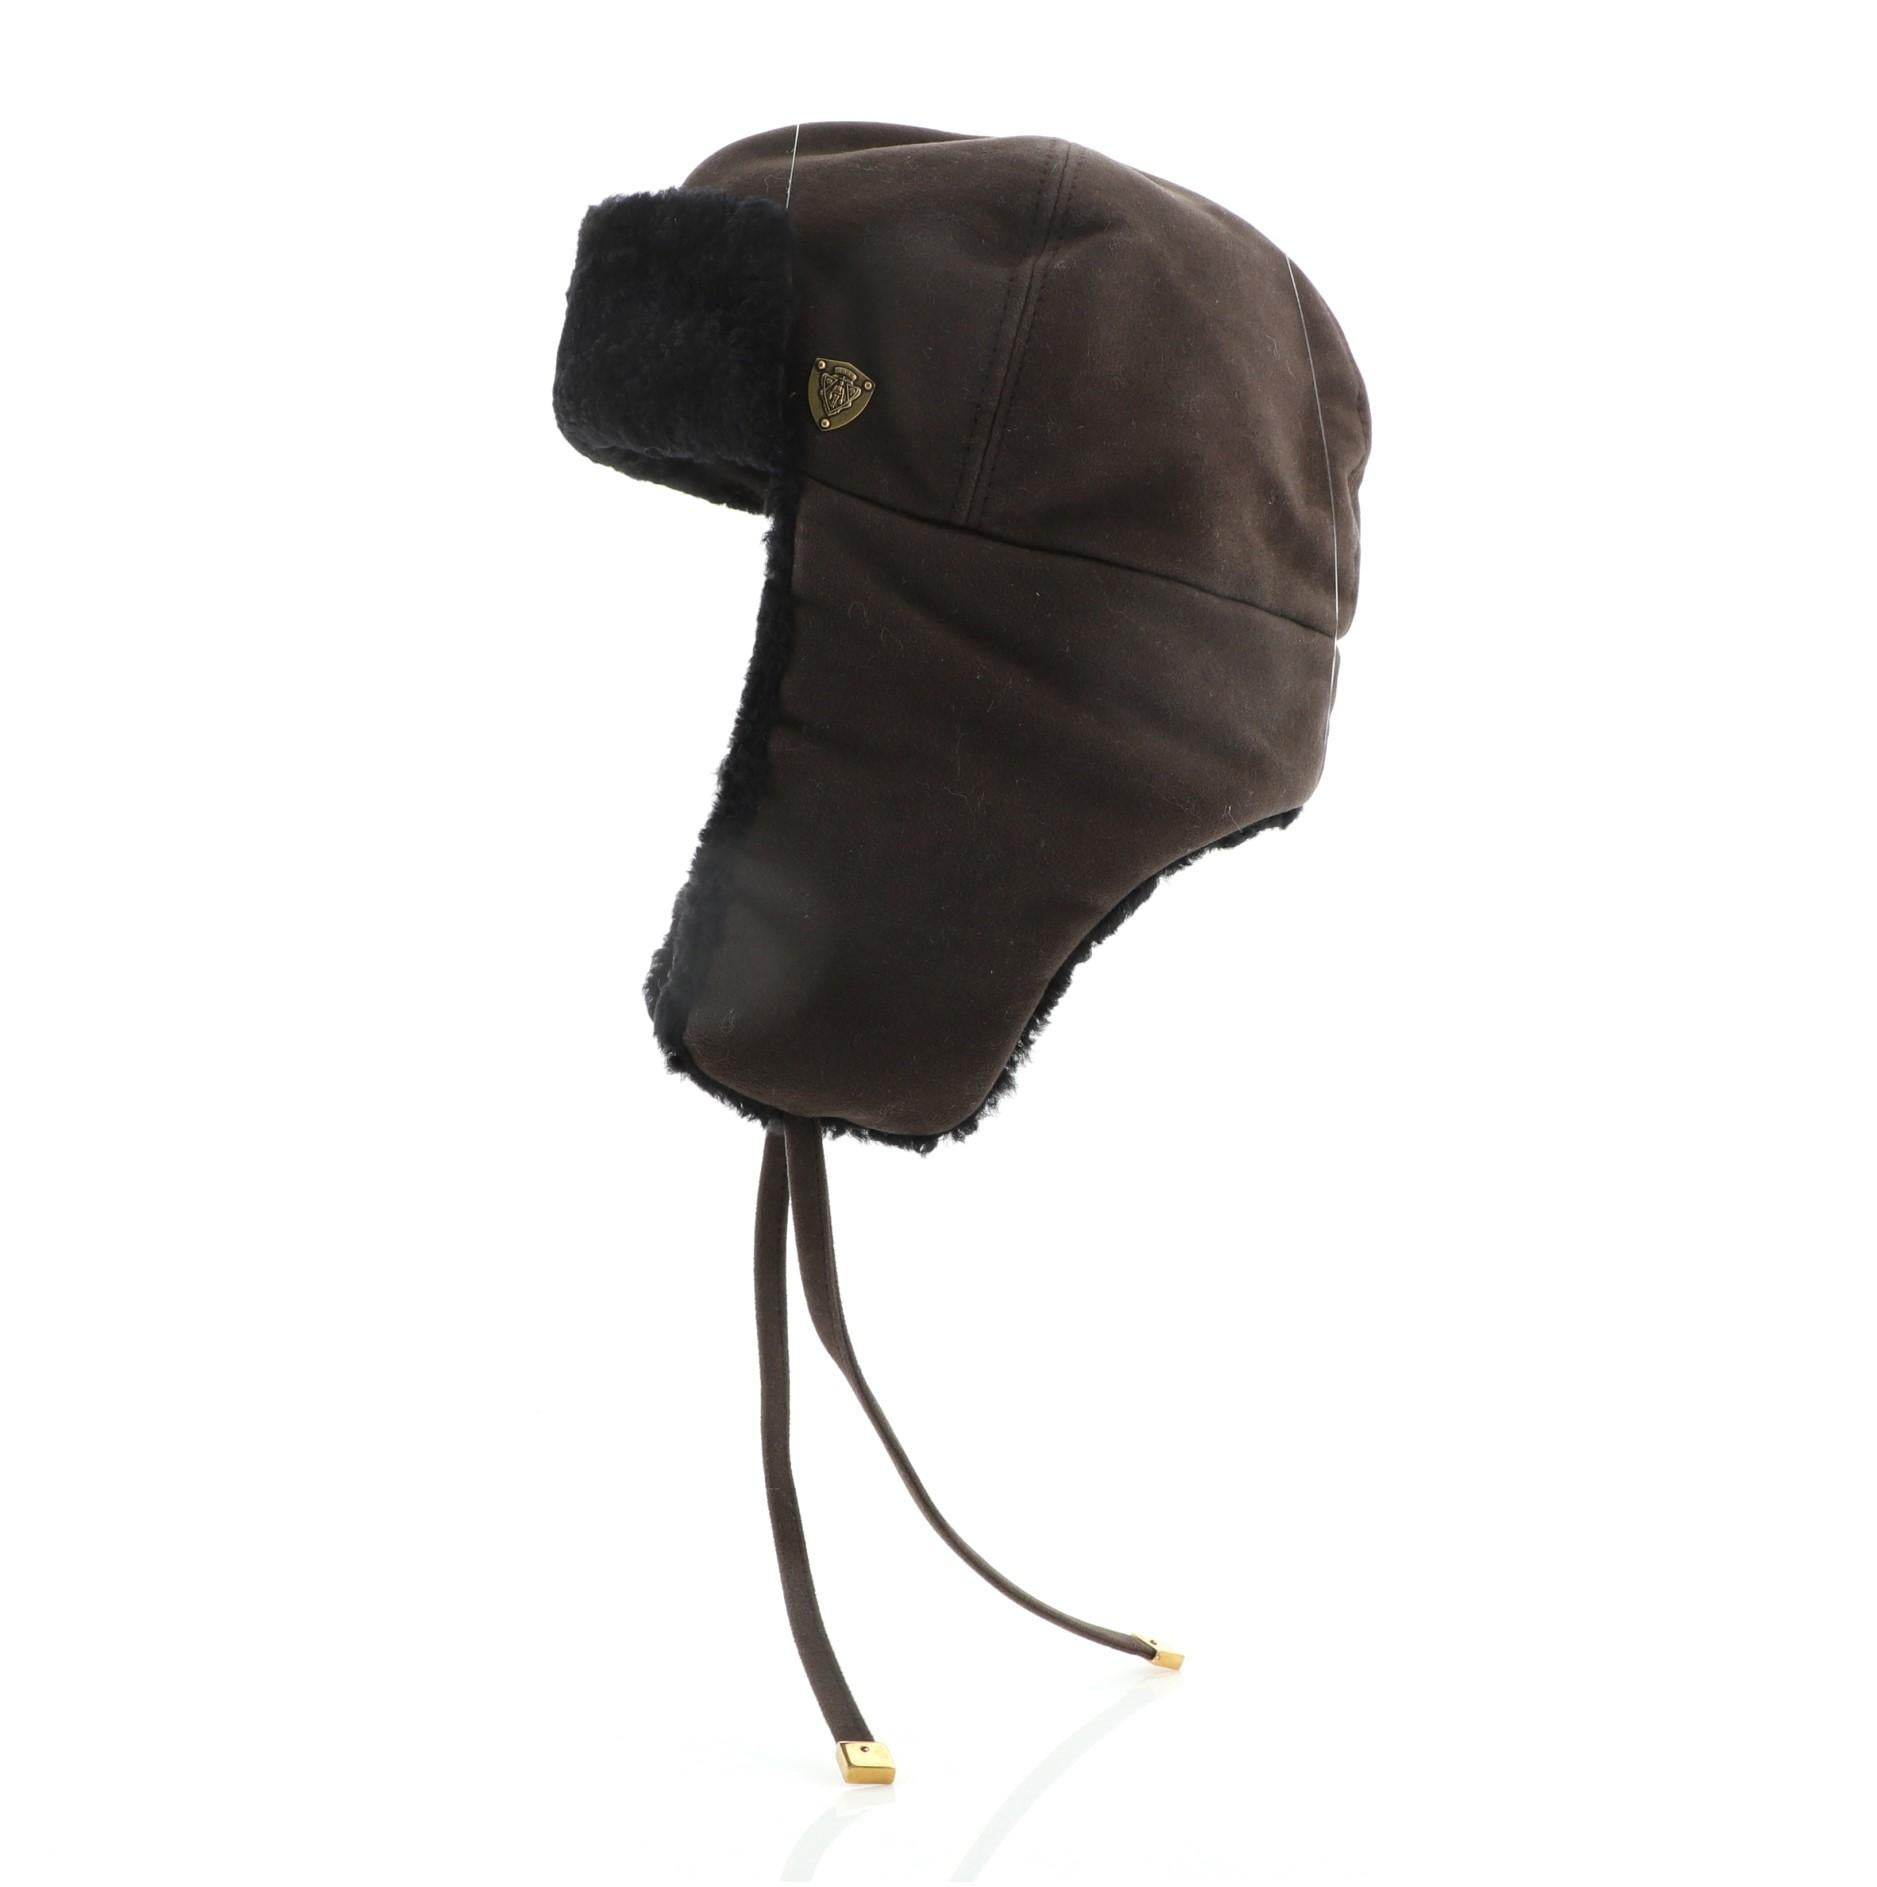 Gucci Crest Trapper Hat Suede and Shearling
Brown Suede Shearling

Condition Details: Wear on exterior, moderate scratches on hardware.

49787MSC

Height 